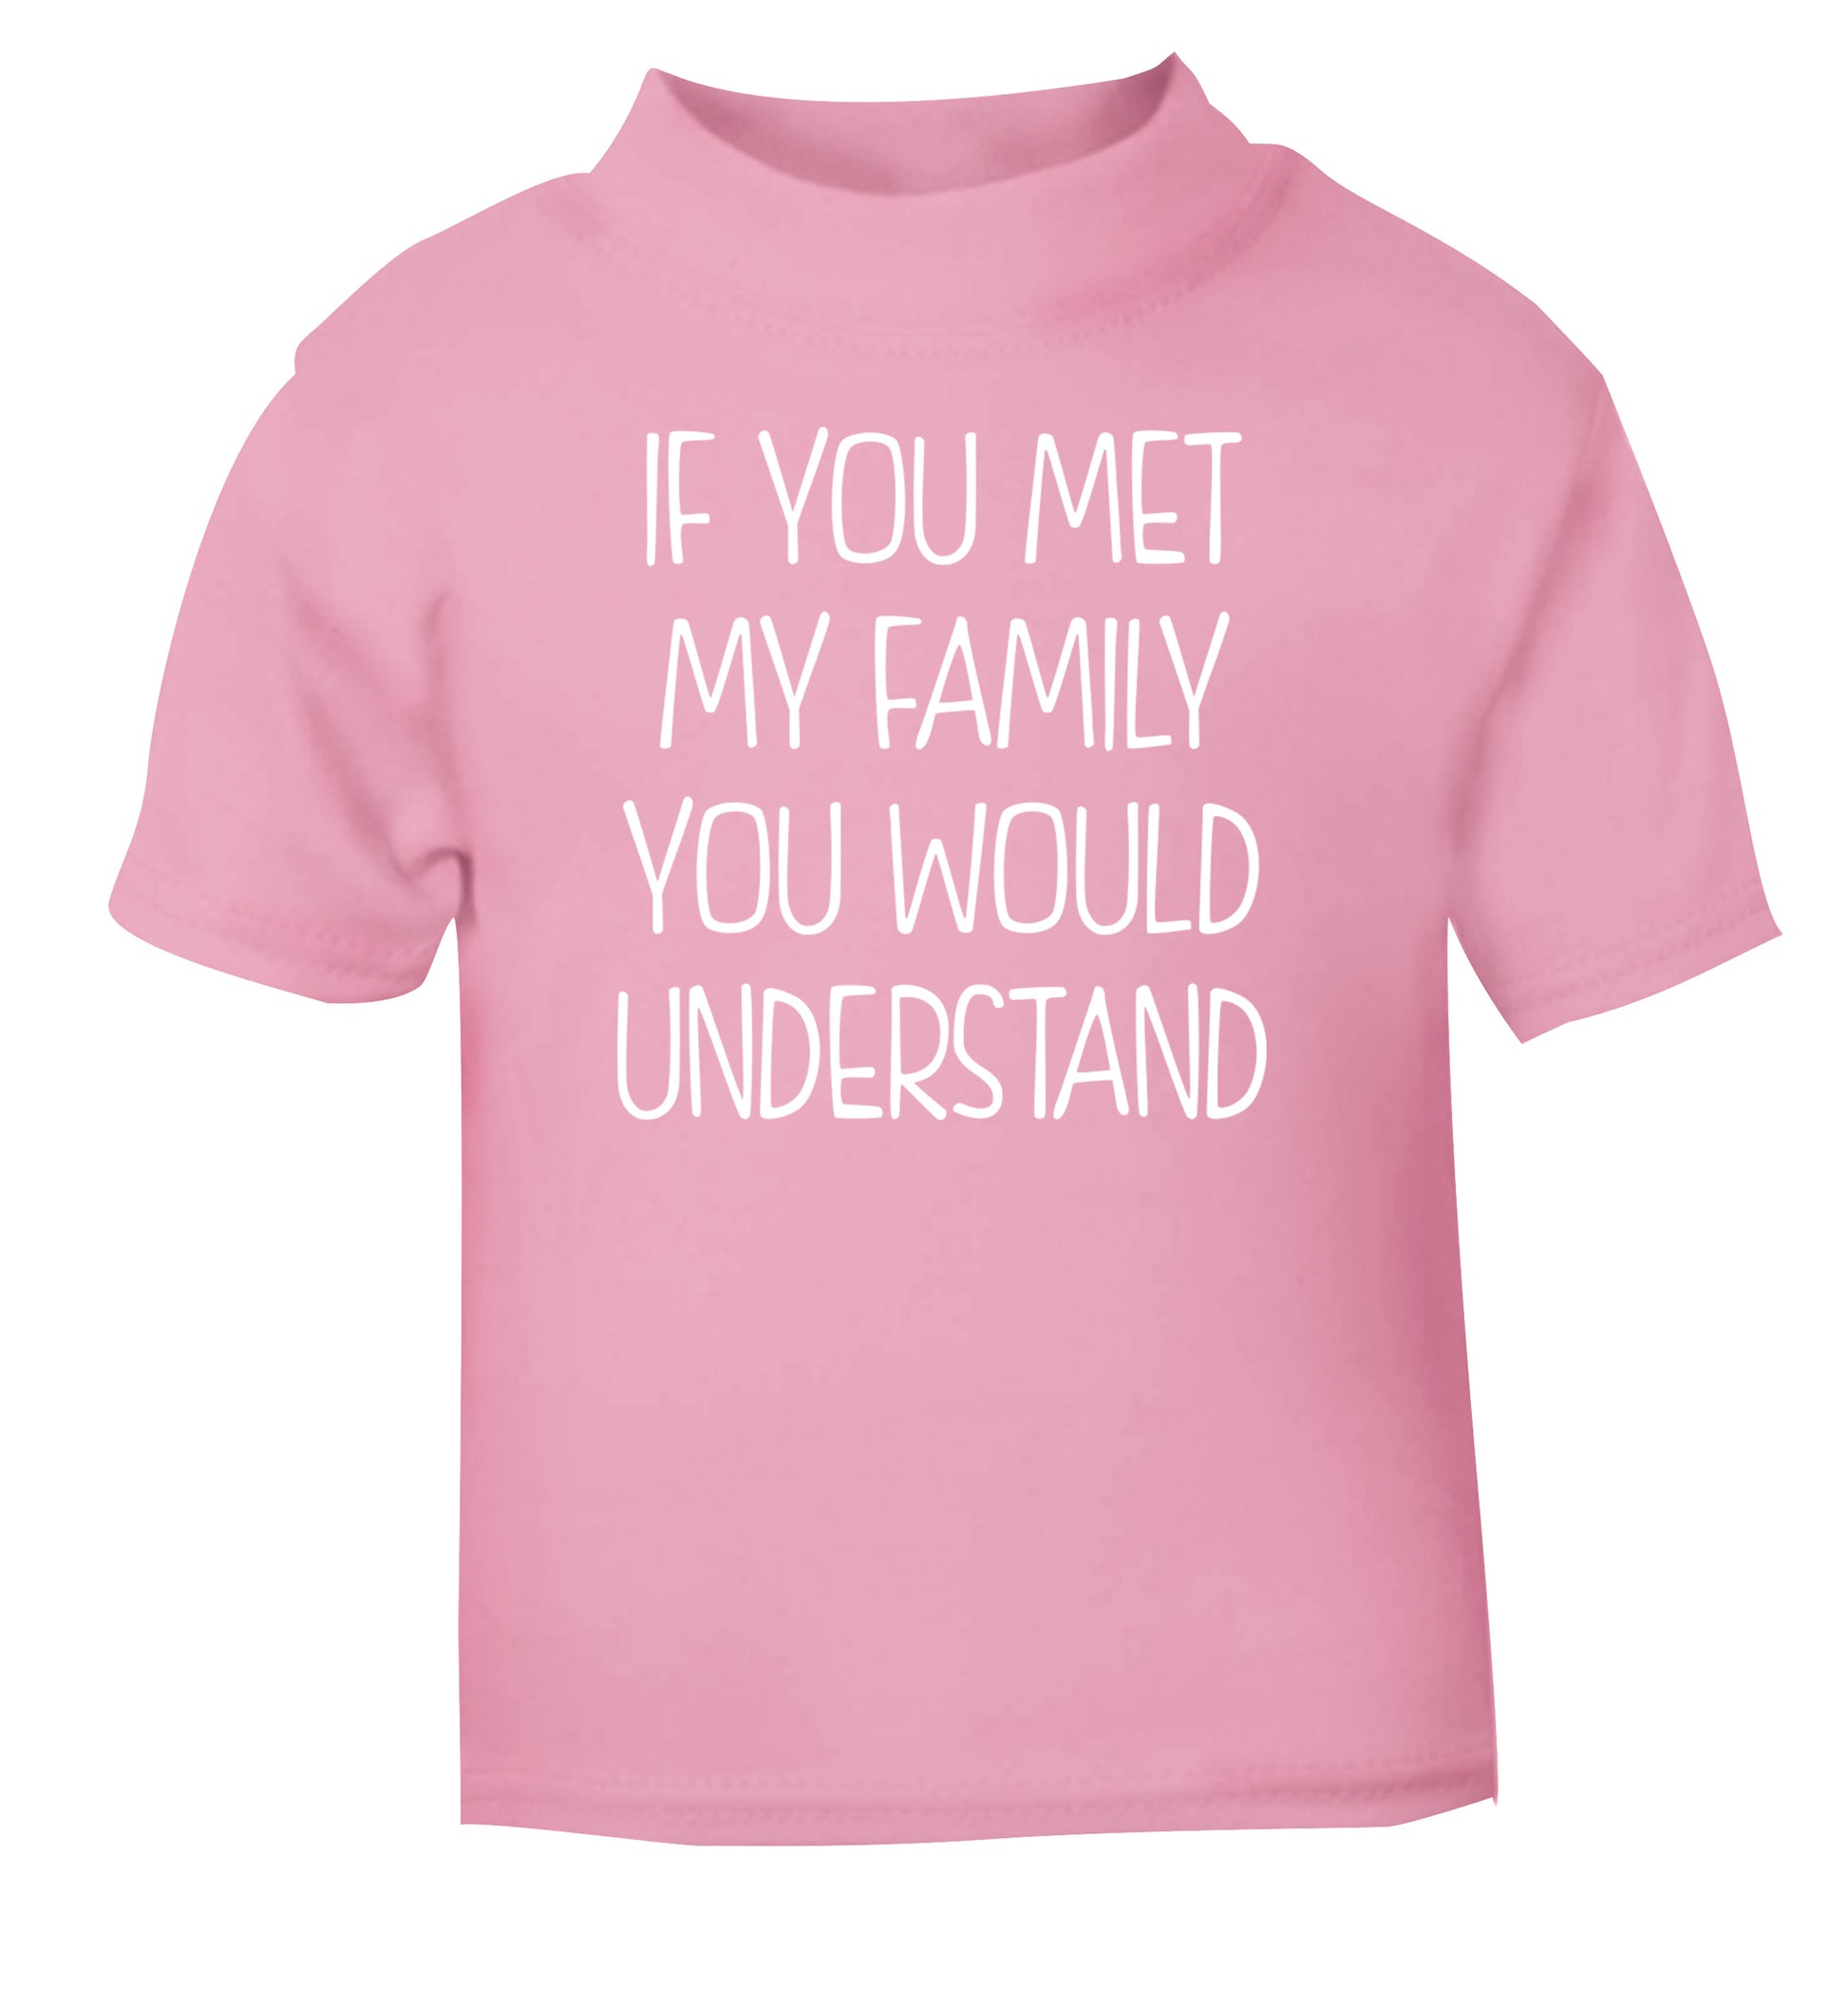 If you met my family you would understand light pink Baby Toddler Tshirt 2 Years